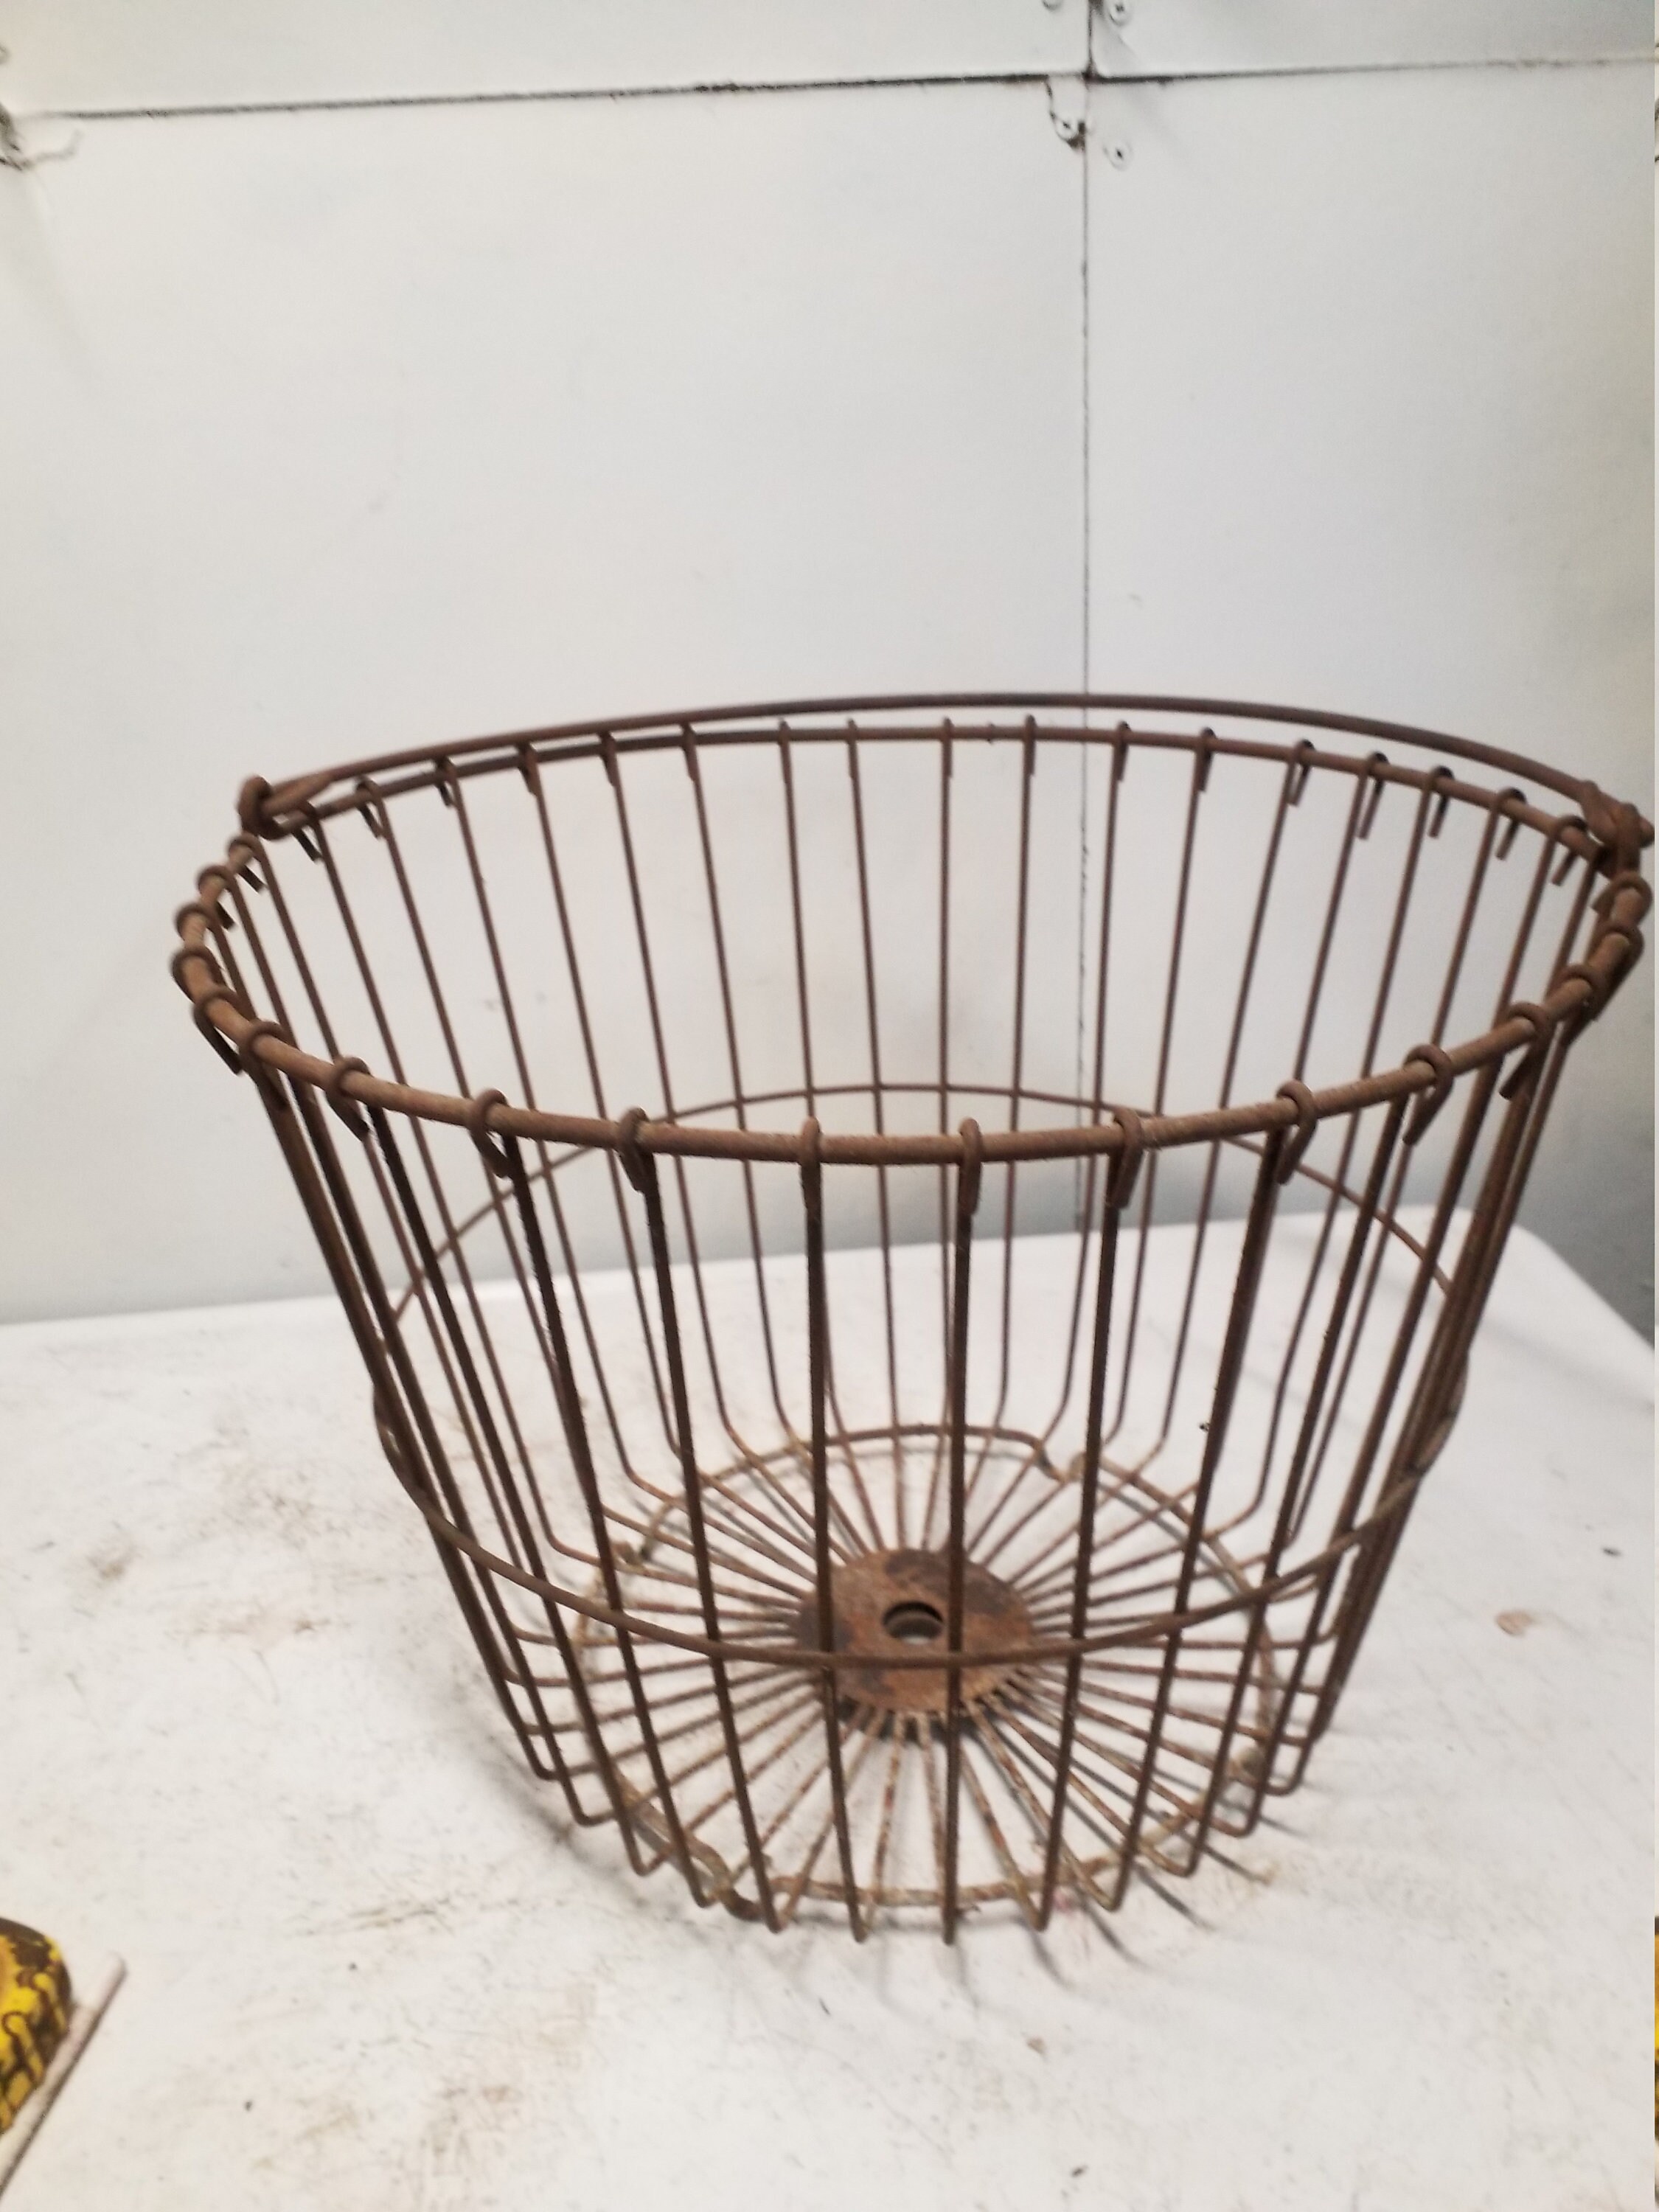  Farmhouse Metal Wire Egg Basket, 7.874.72in Egg